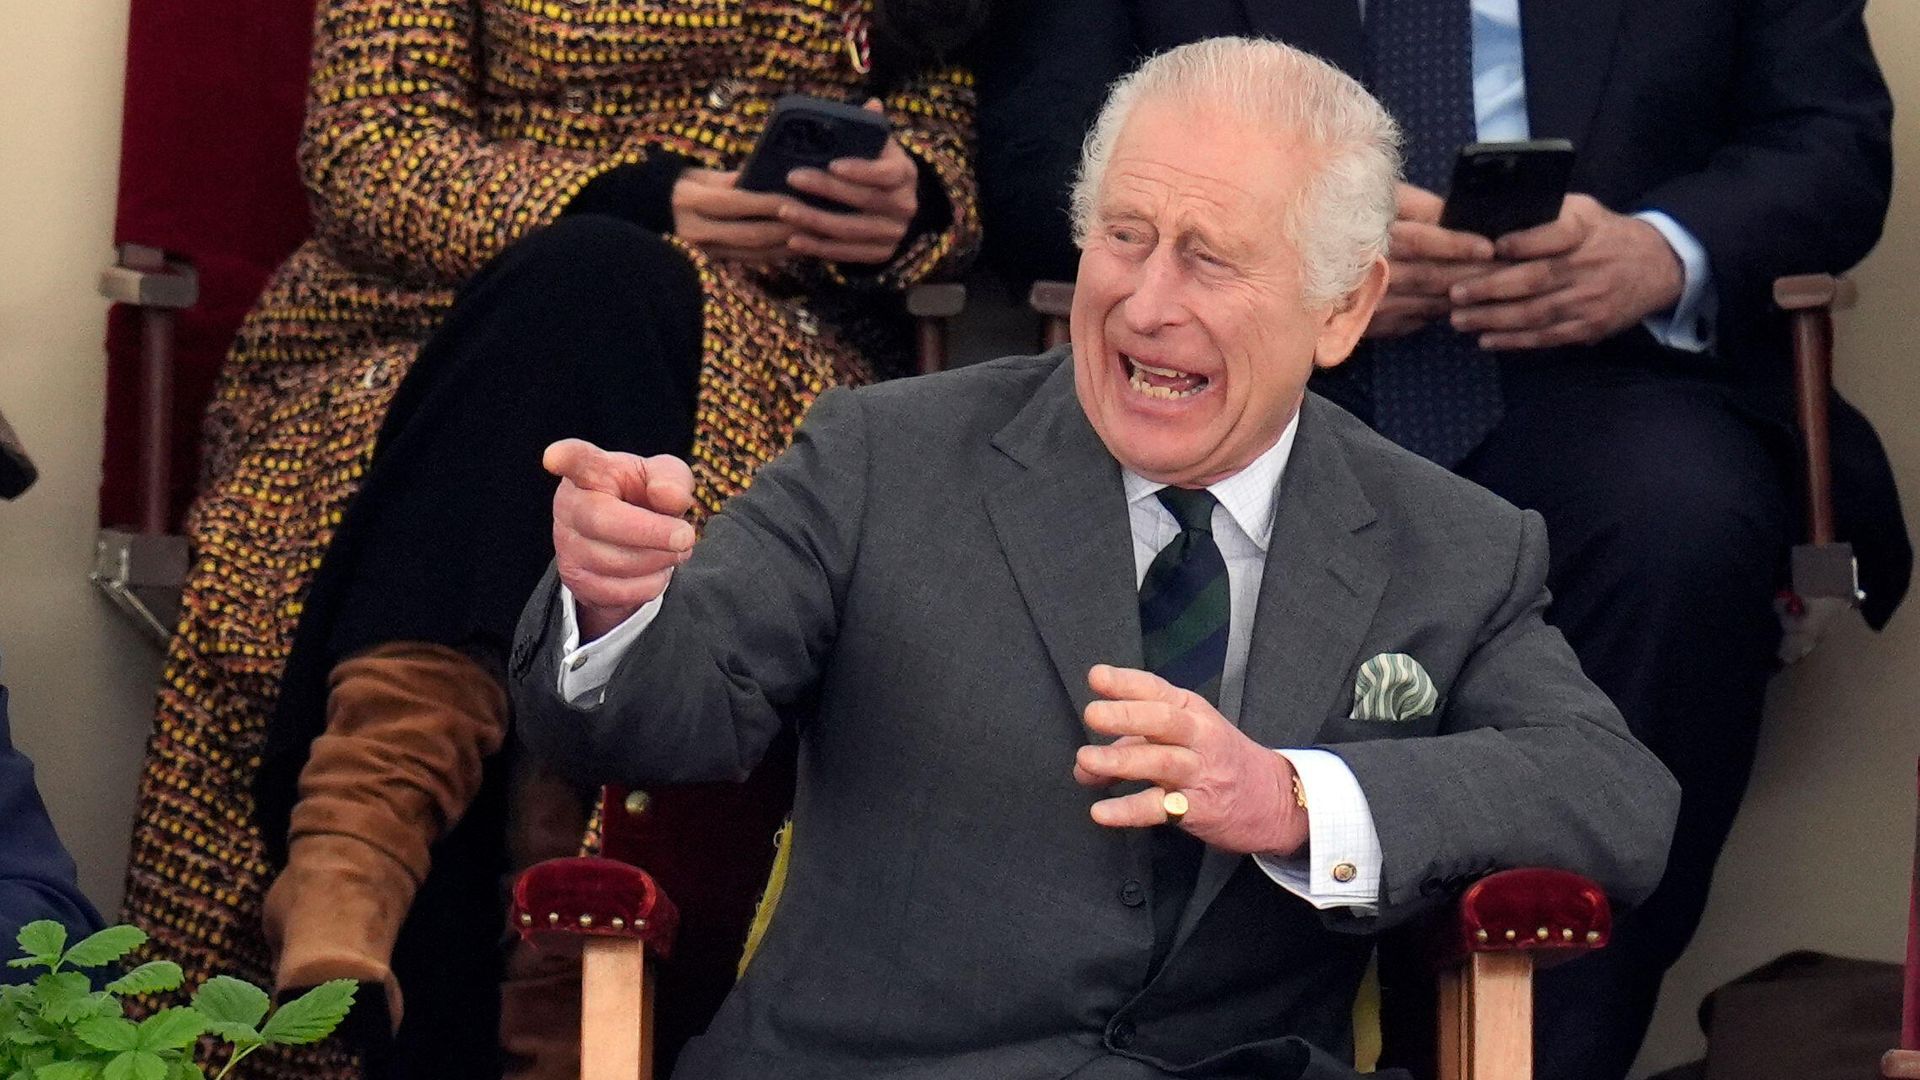 King Charles has laughing fit during surprise outing - best photos